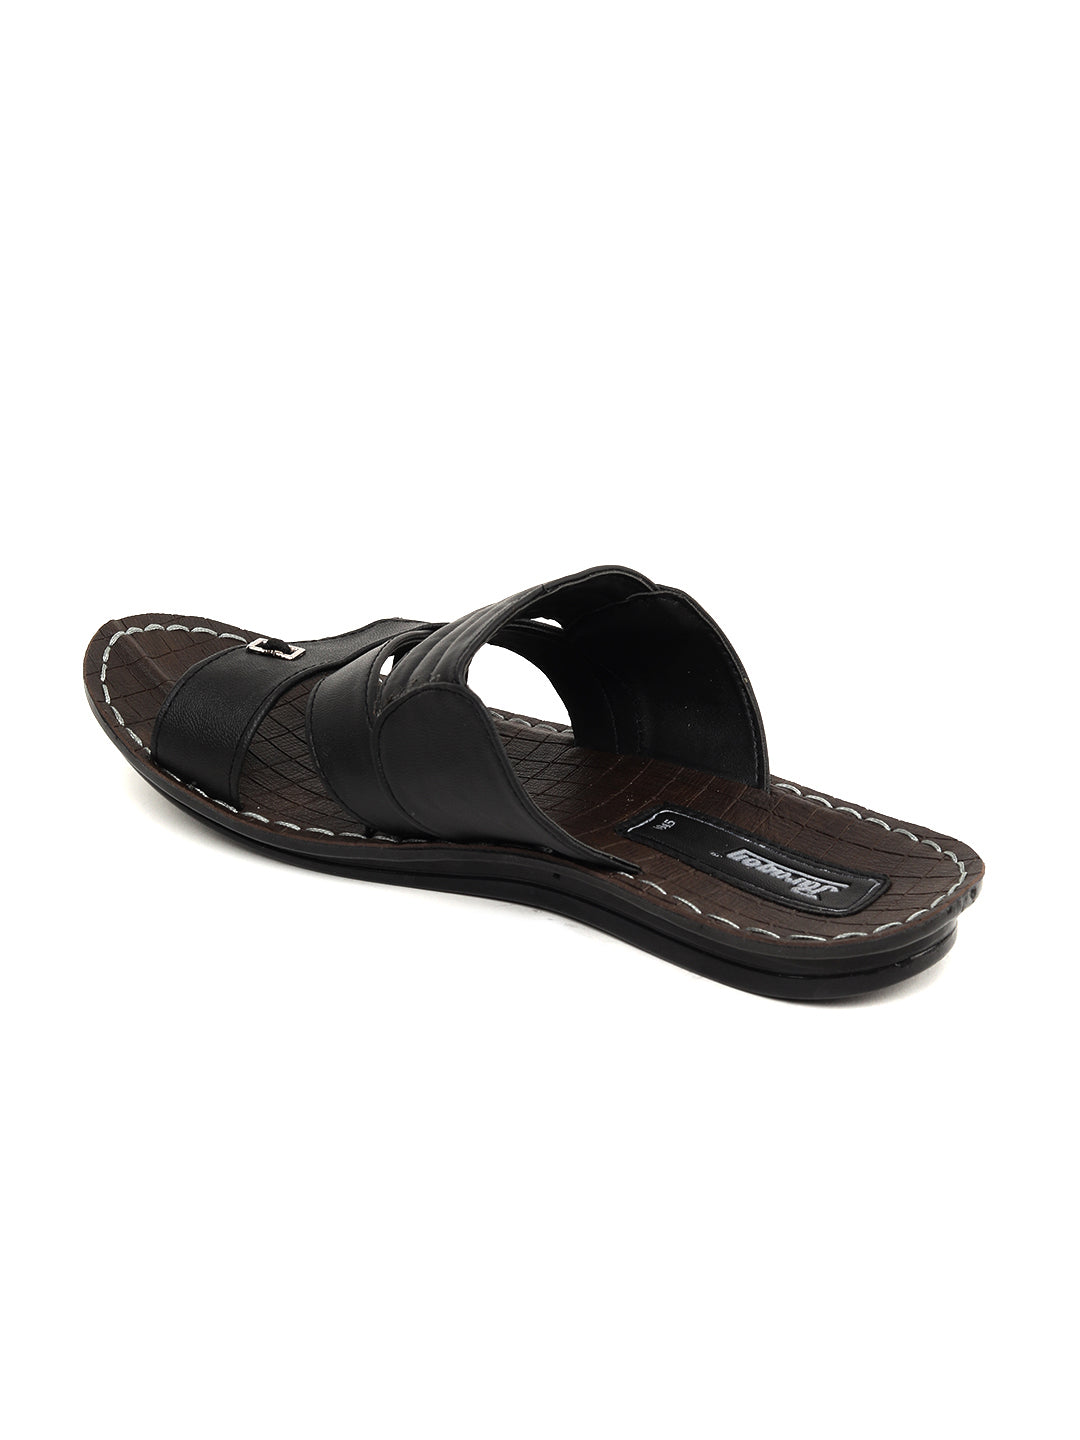 Paragon PU6945G Men Stylish Sandals | Comfortable Sandals for Daily Outdoor Use | Casual Formal Sandals with Cushioned Soles